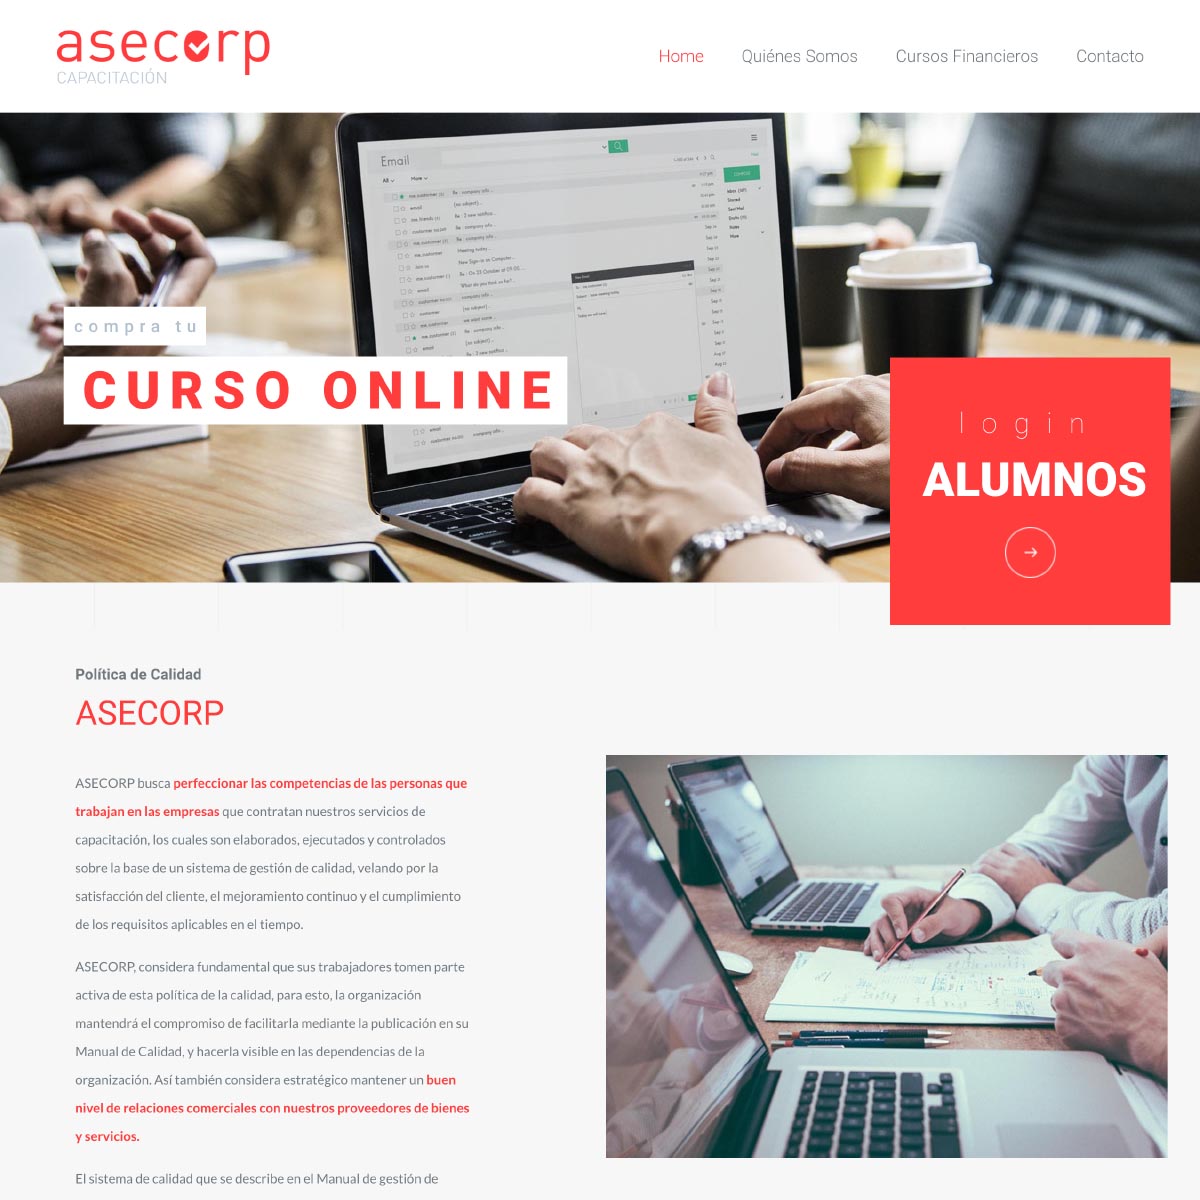 asecorp